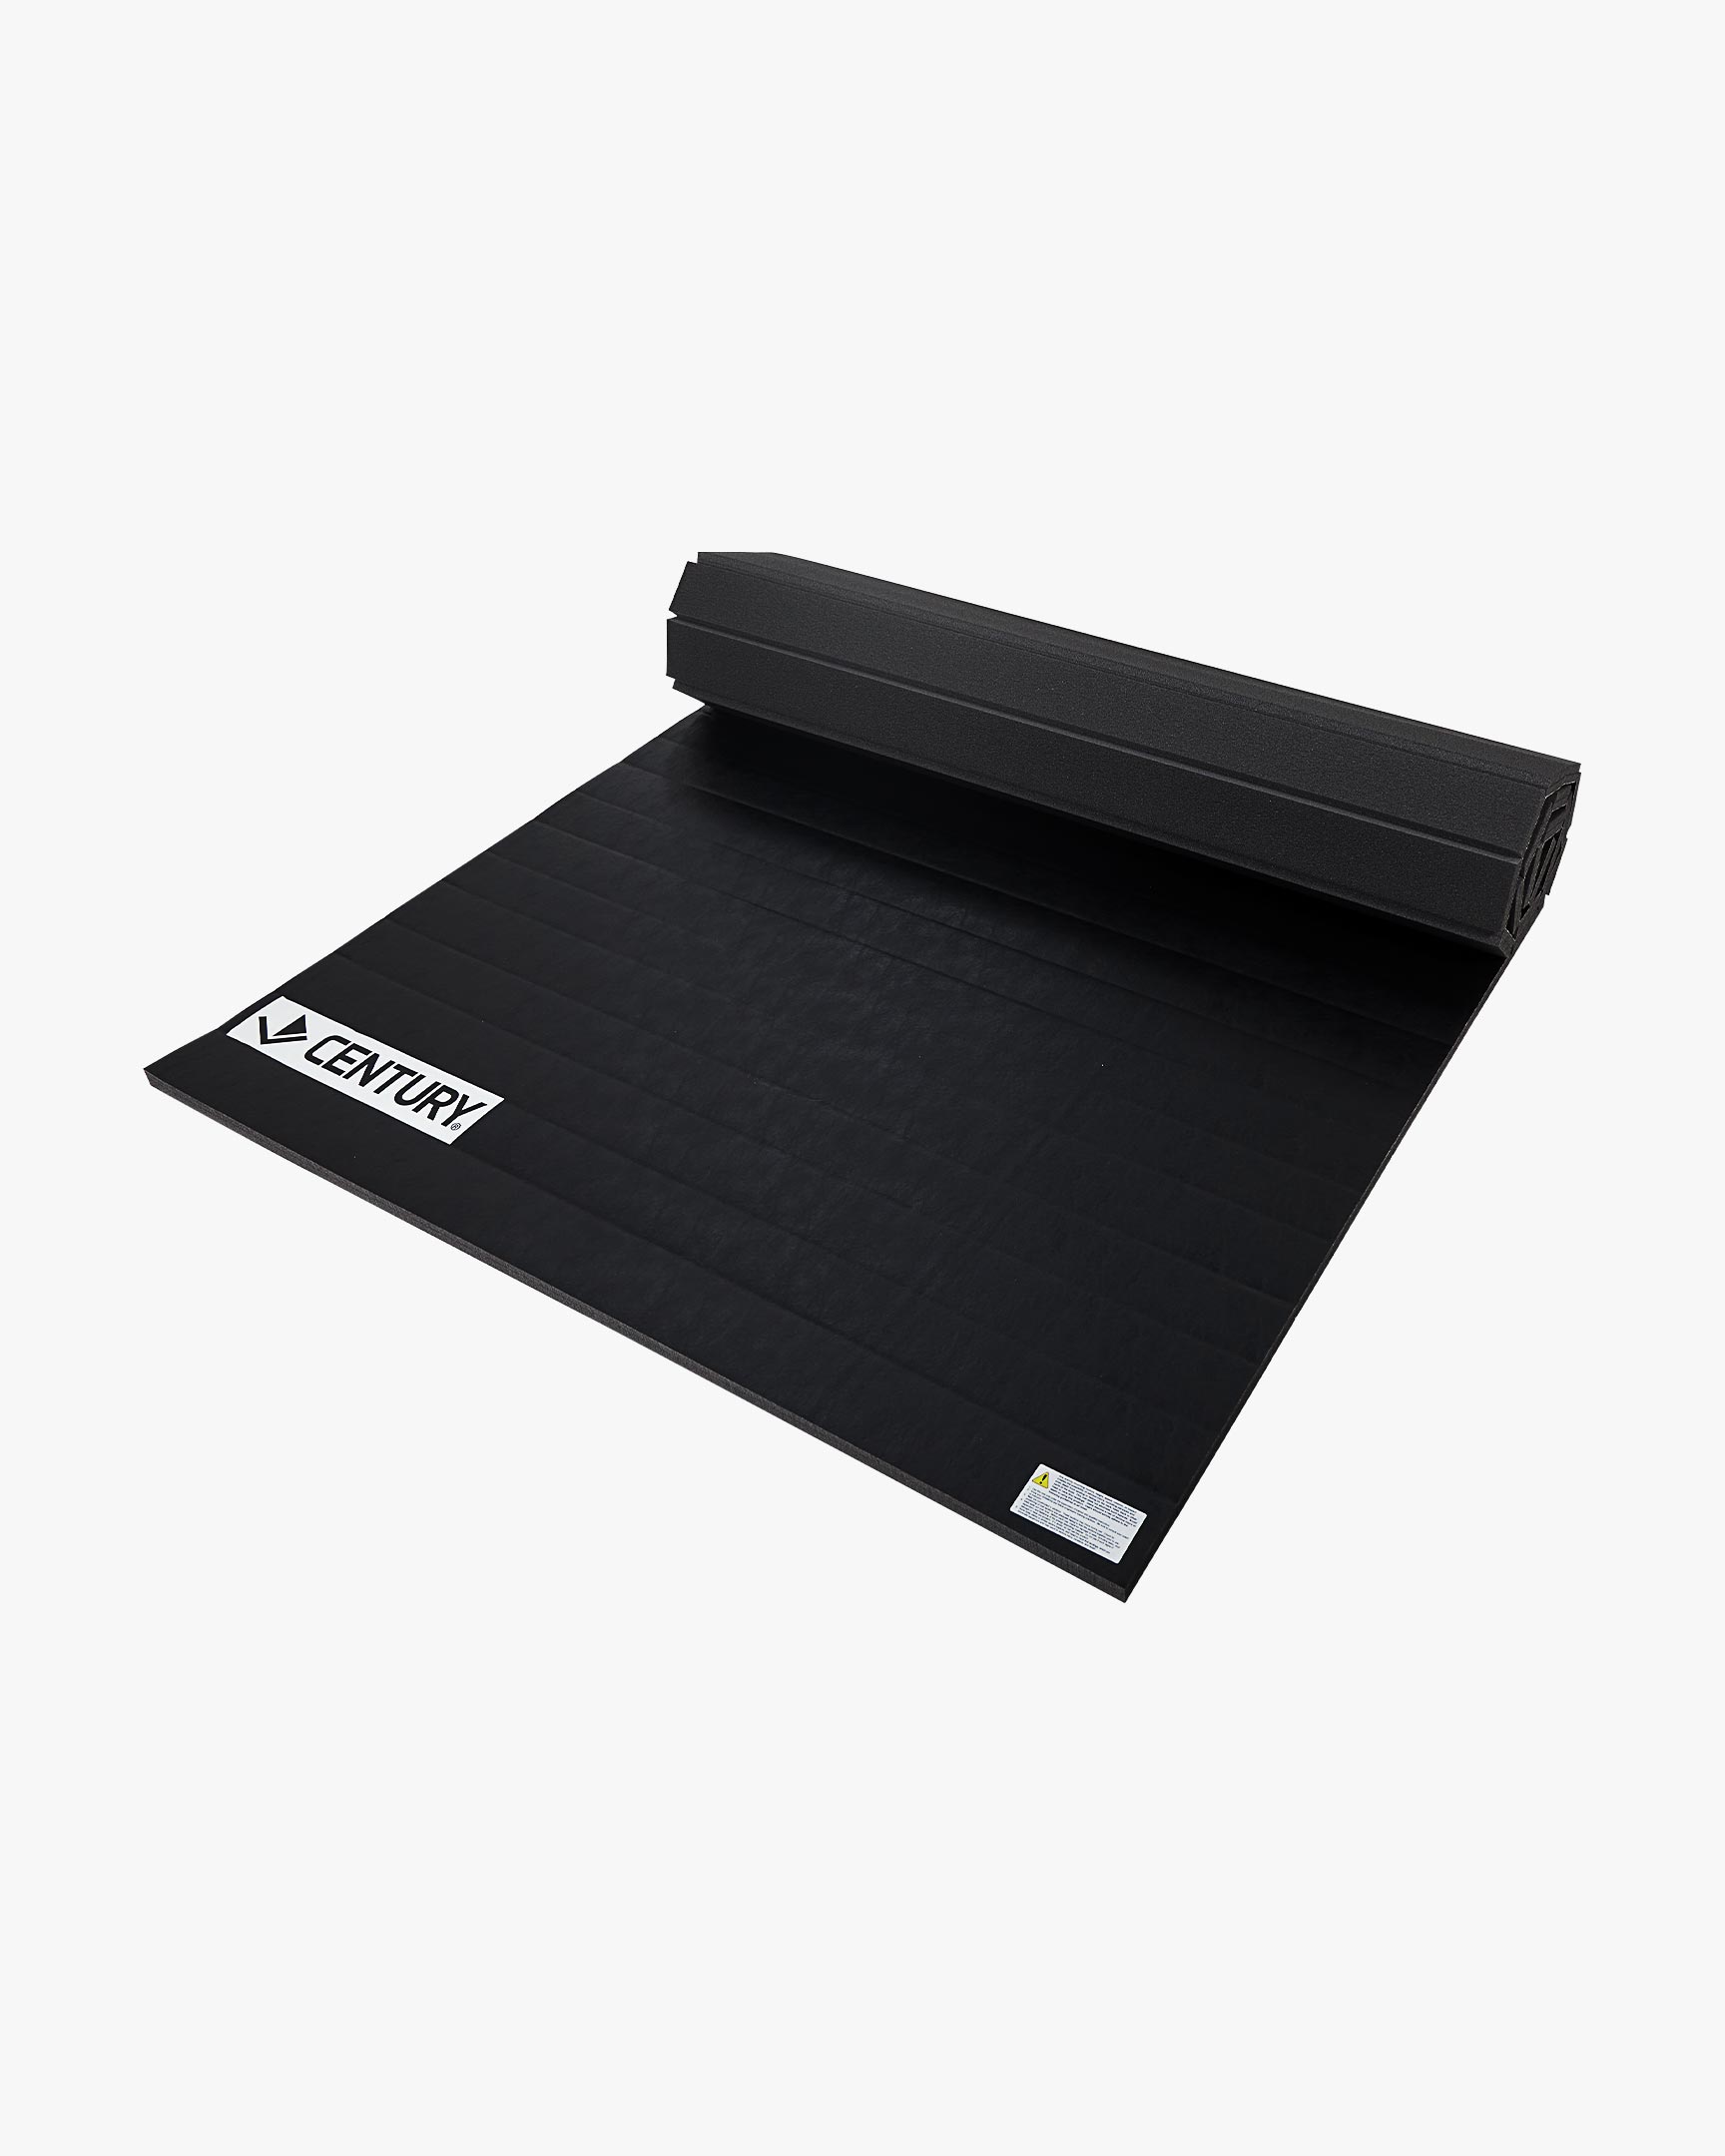 Home Tatami Rollout Mat - 5ft x 10ft x 1.25in Thick Black